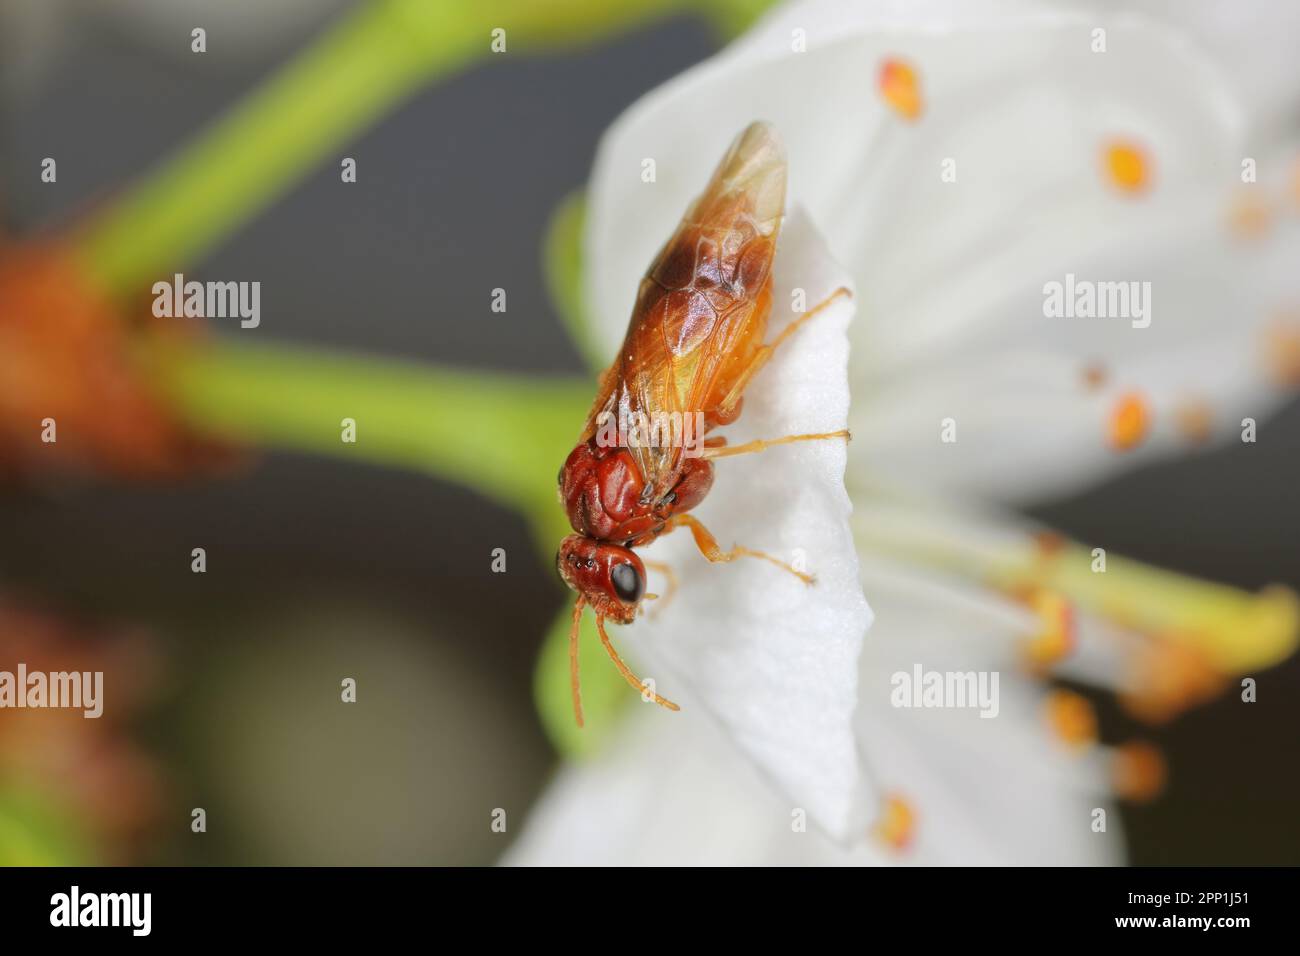 Plum sawfly (Hoplocampa flava) on plum blossoms. Larvae bore in the unripe fruits. An important pest of plum trees causing significant damage. Stock Photo